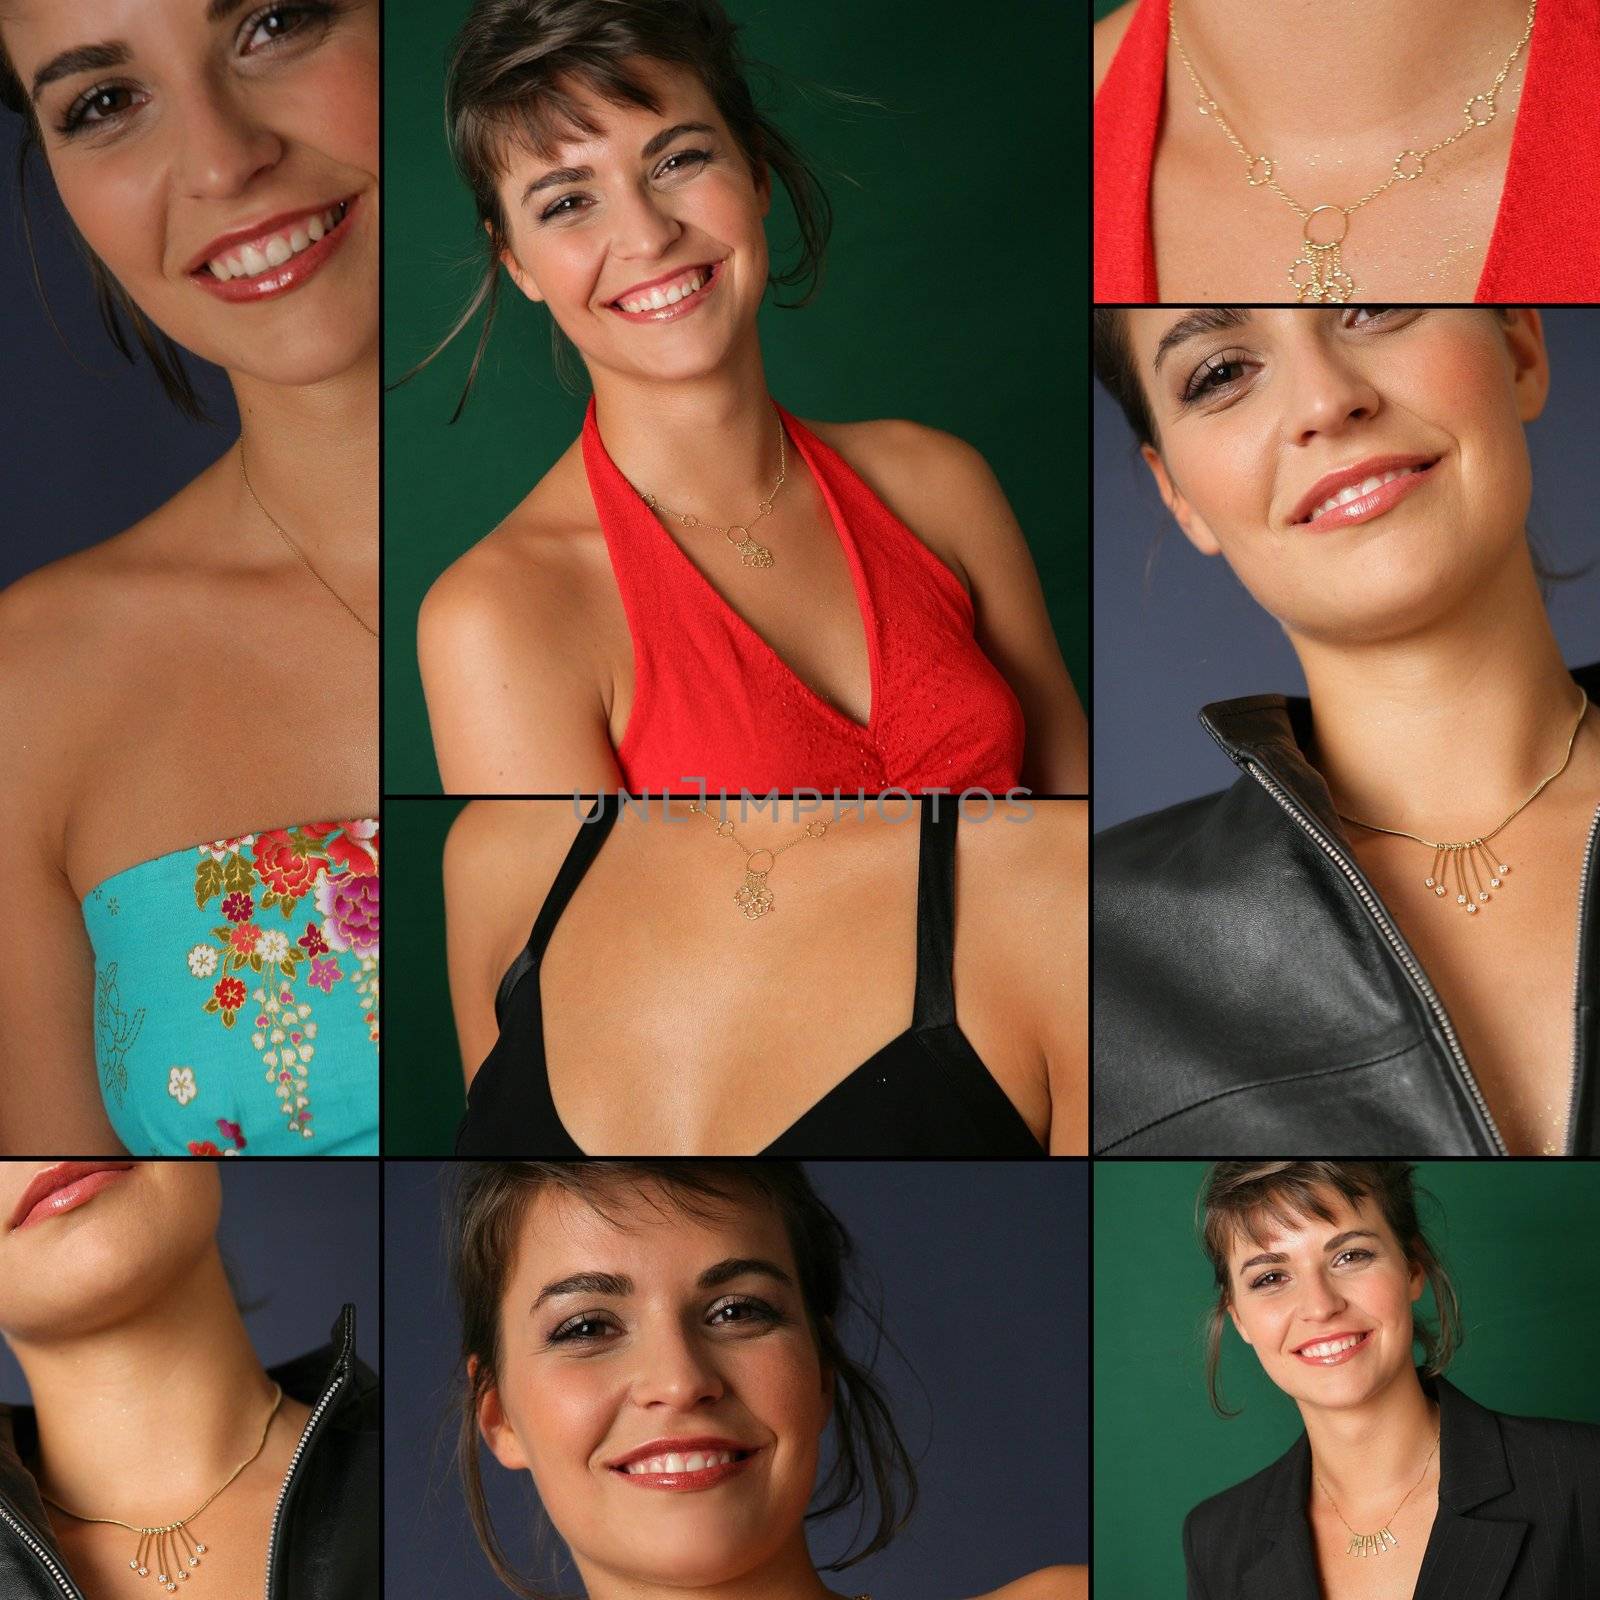 Collage of a good-looking woman by phovoir